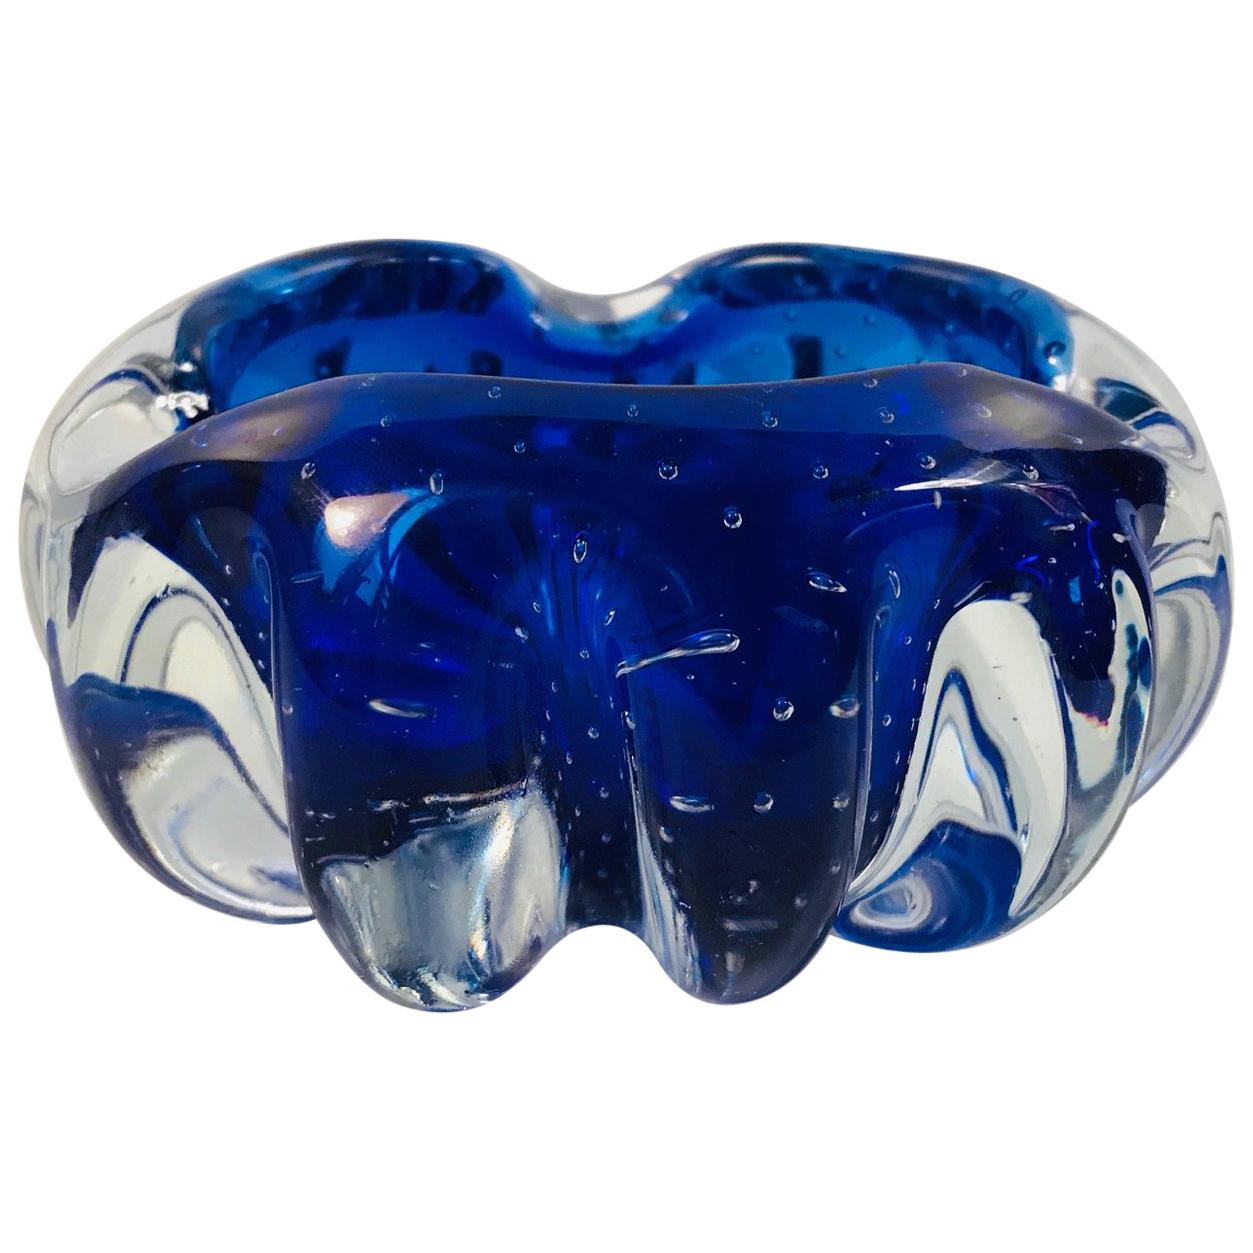 Blue Sommerso Murano Glass Ashtray with Air Bubbles, 1960s